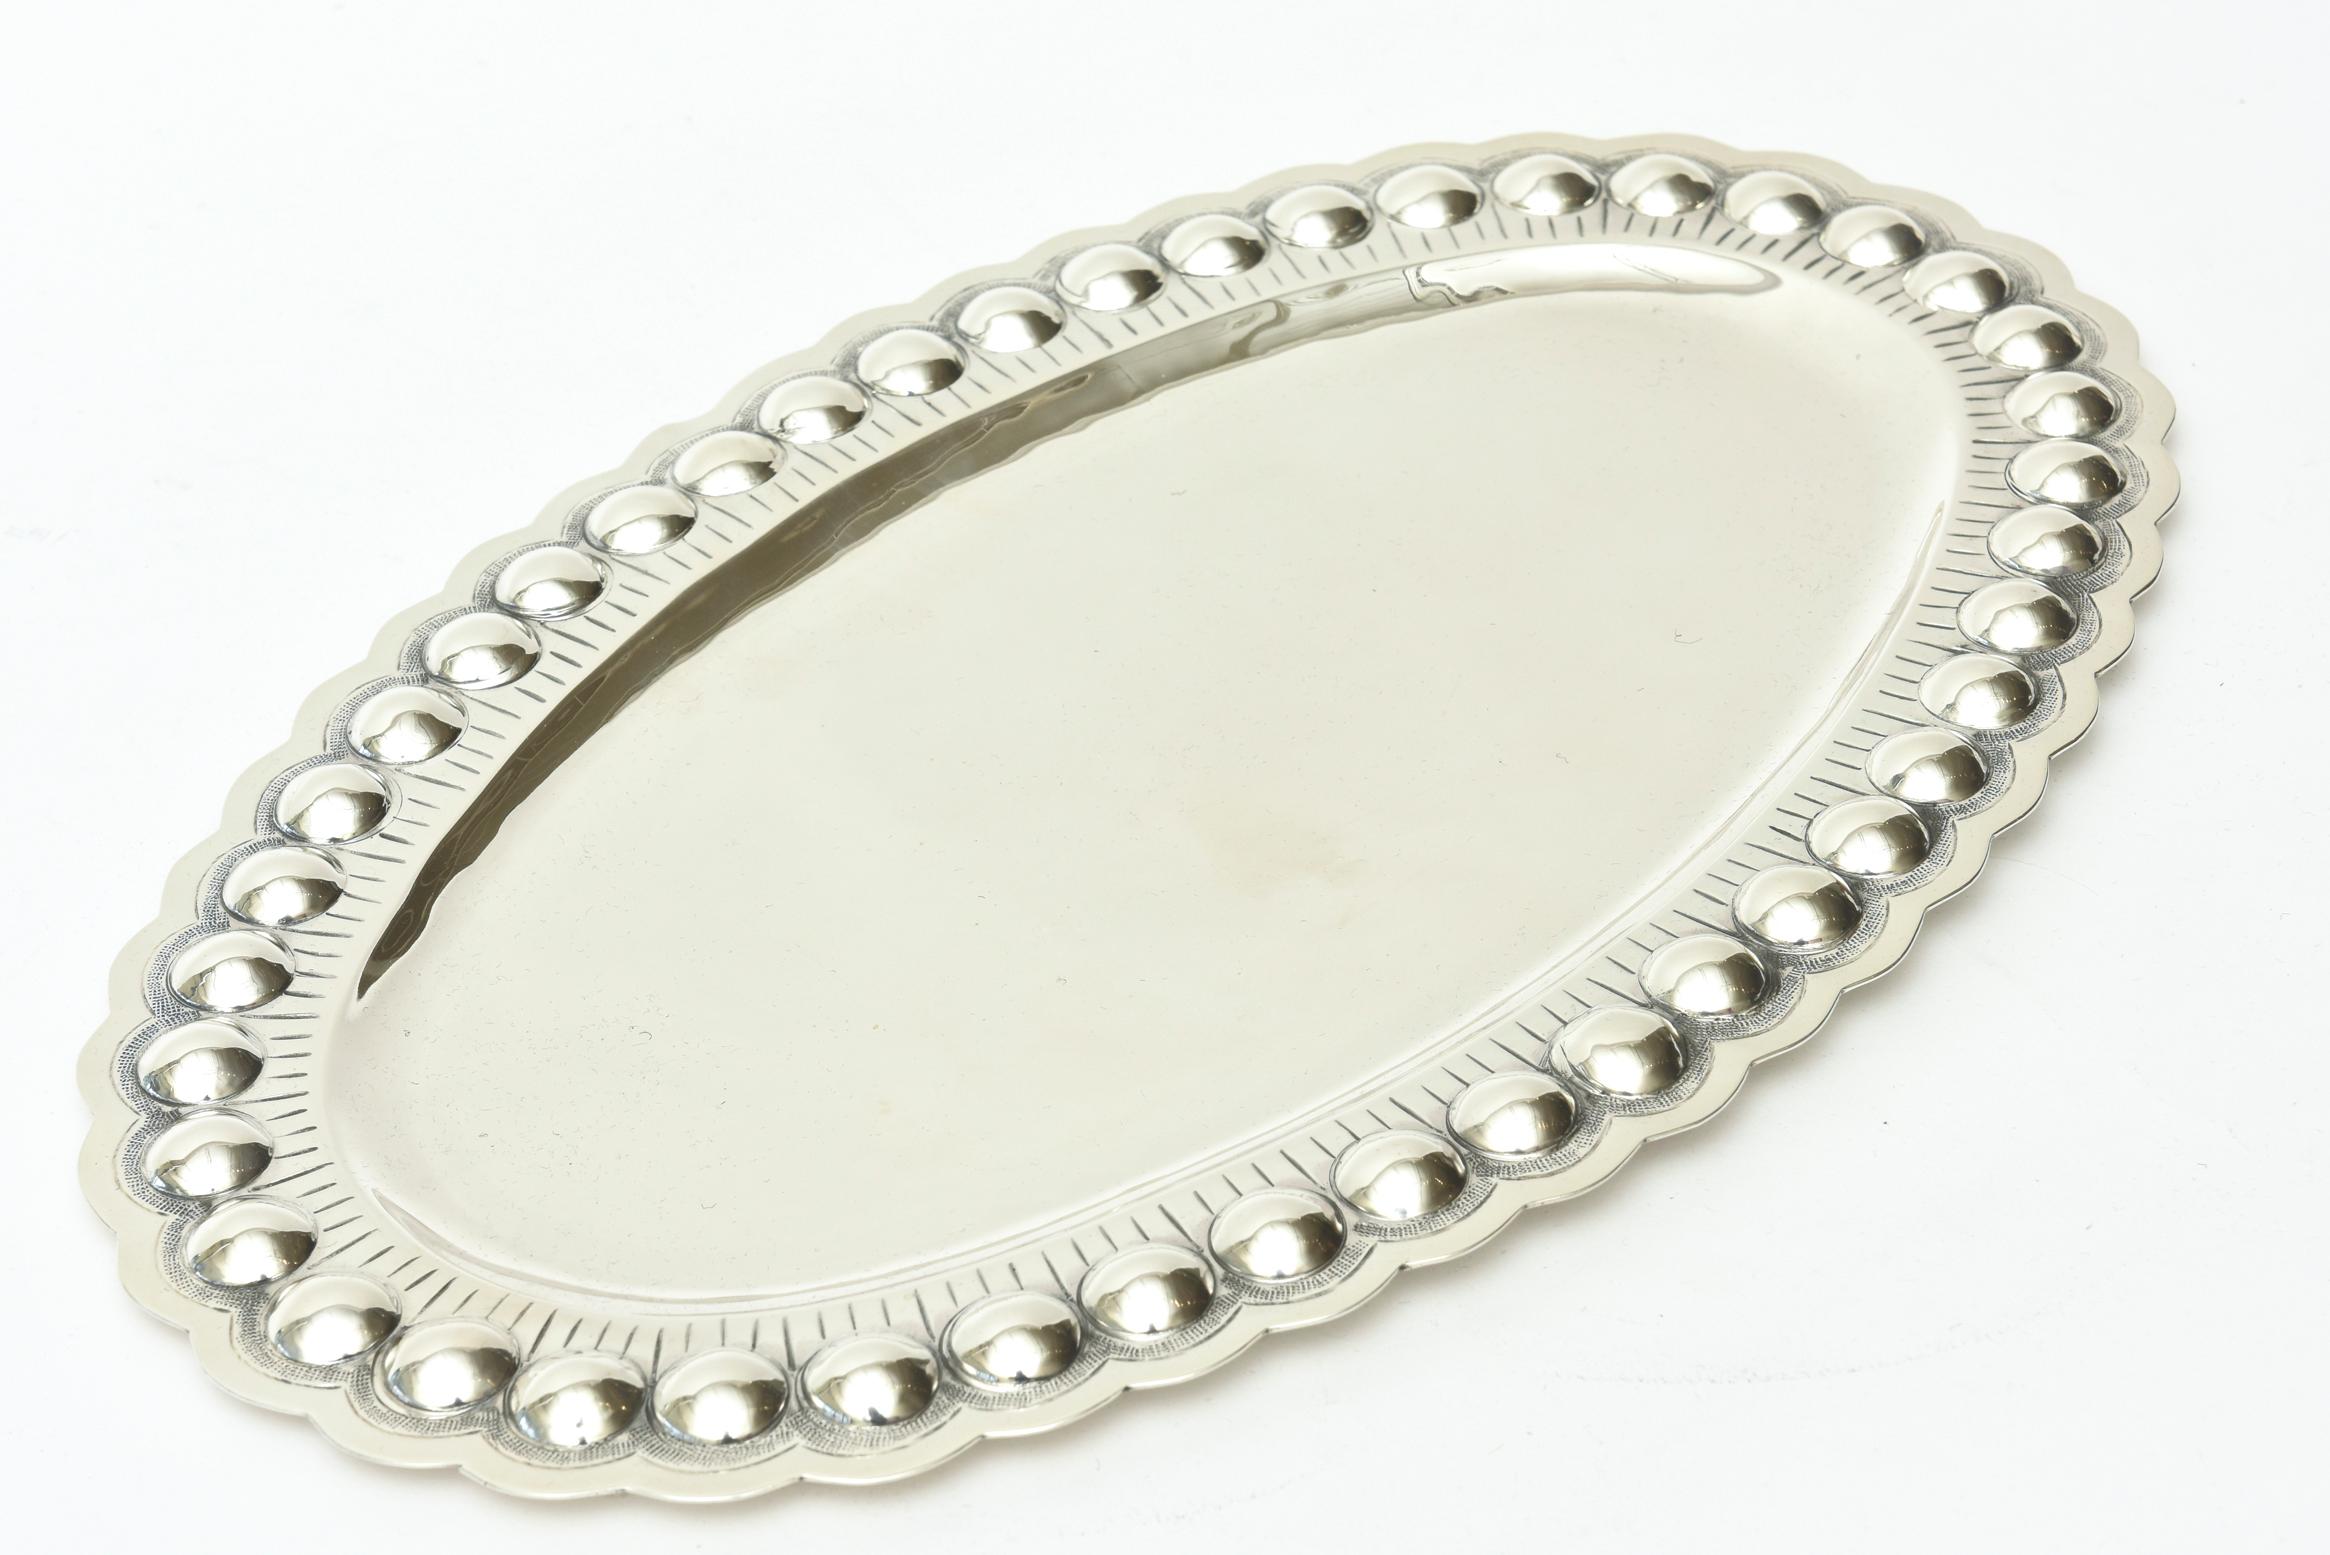 This lovely embellished Mid-Century Modern sterling silver tray is oval. The applications are varied for a multitude of uses as barware, serving and or holding towels for your bathroom. It is hallmarked 925, 1000 Sterling. It is from the 1950s and